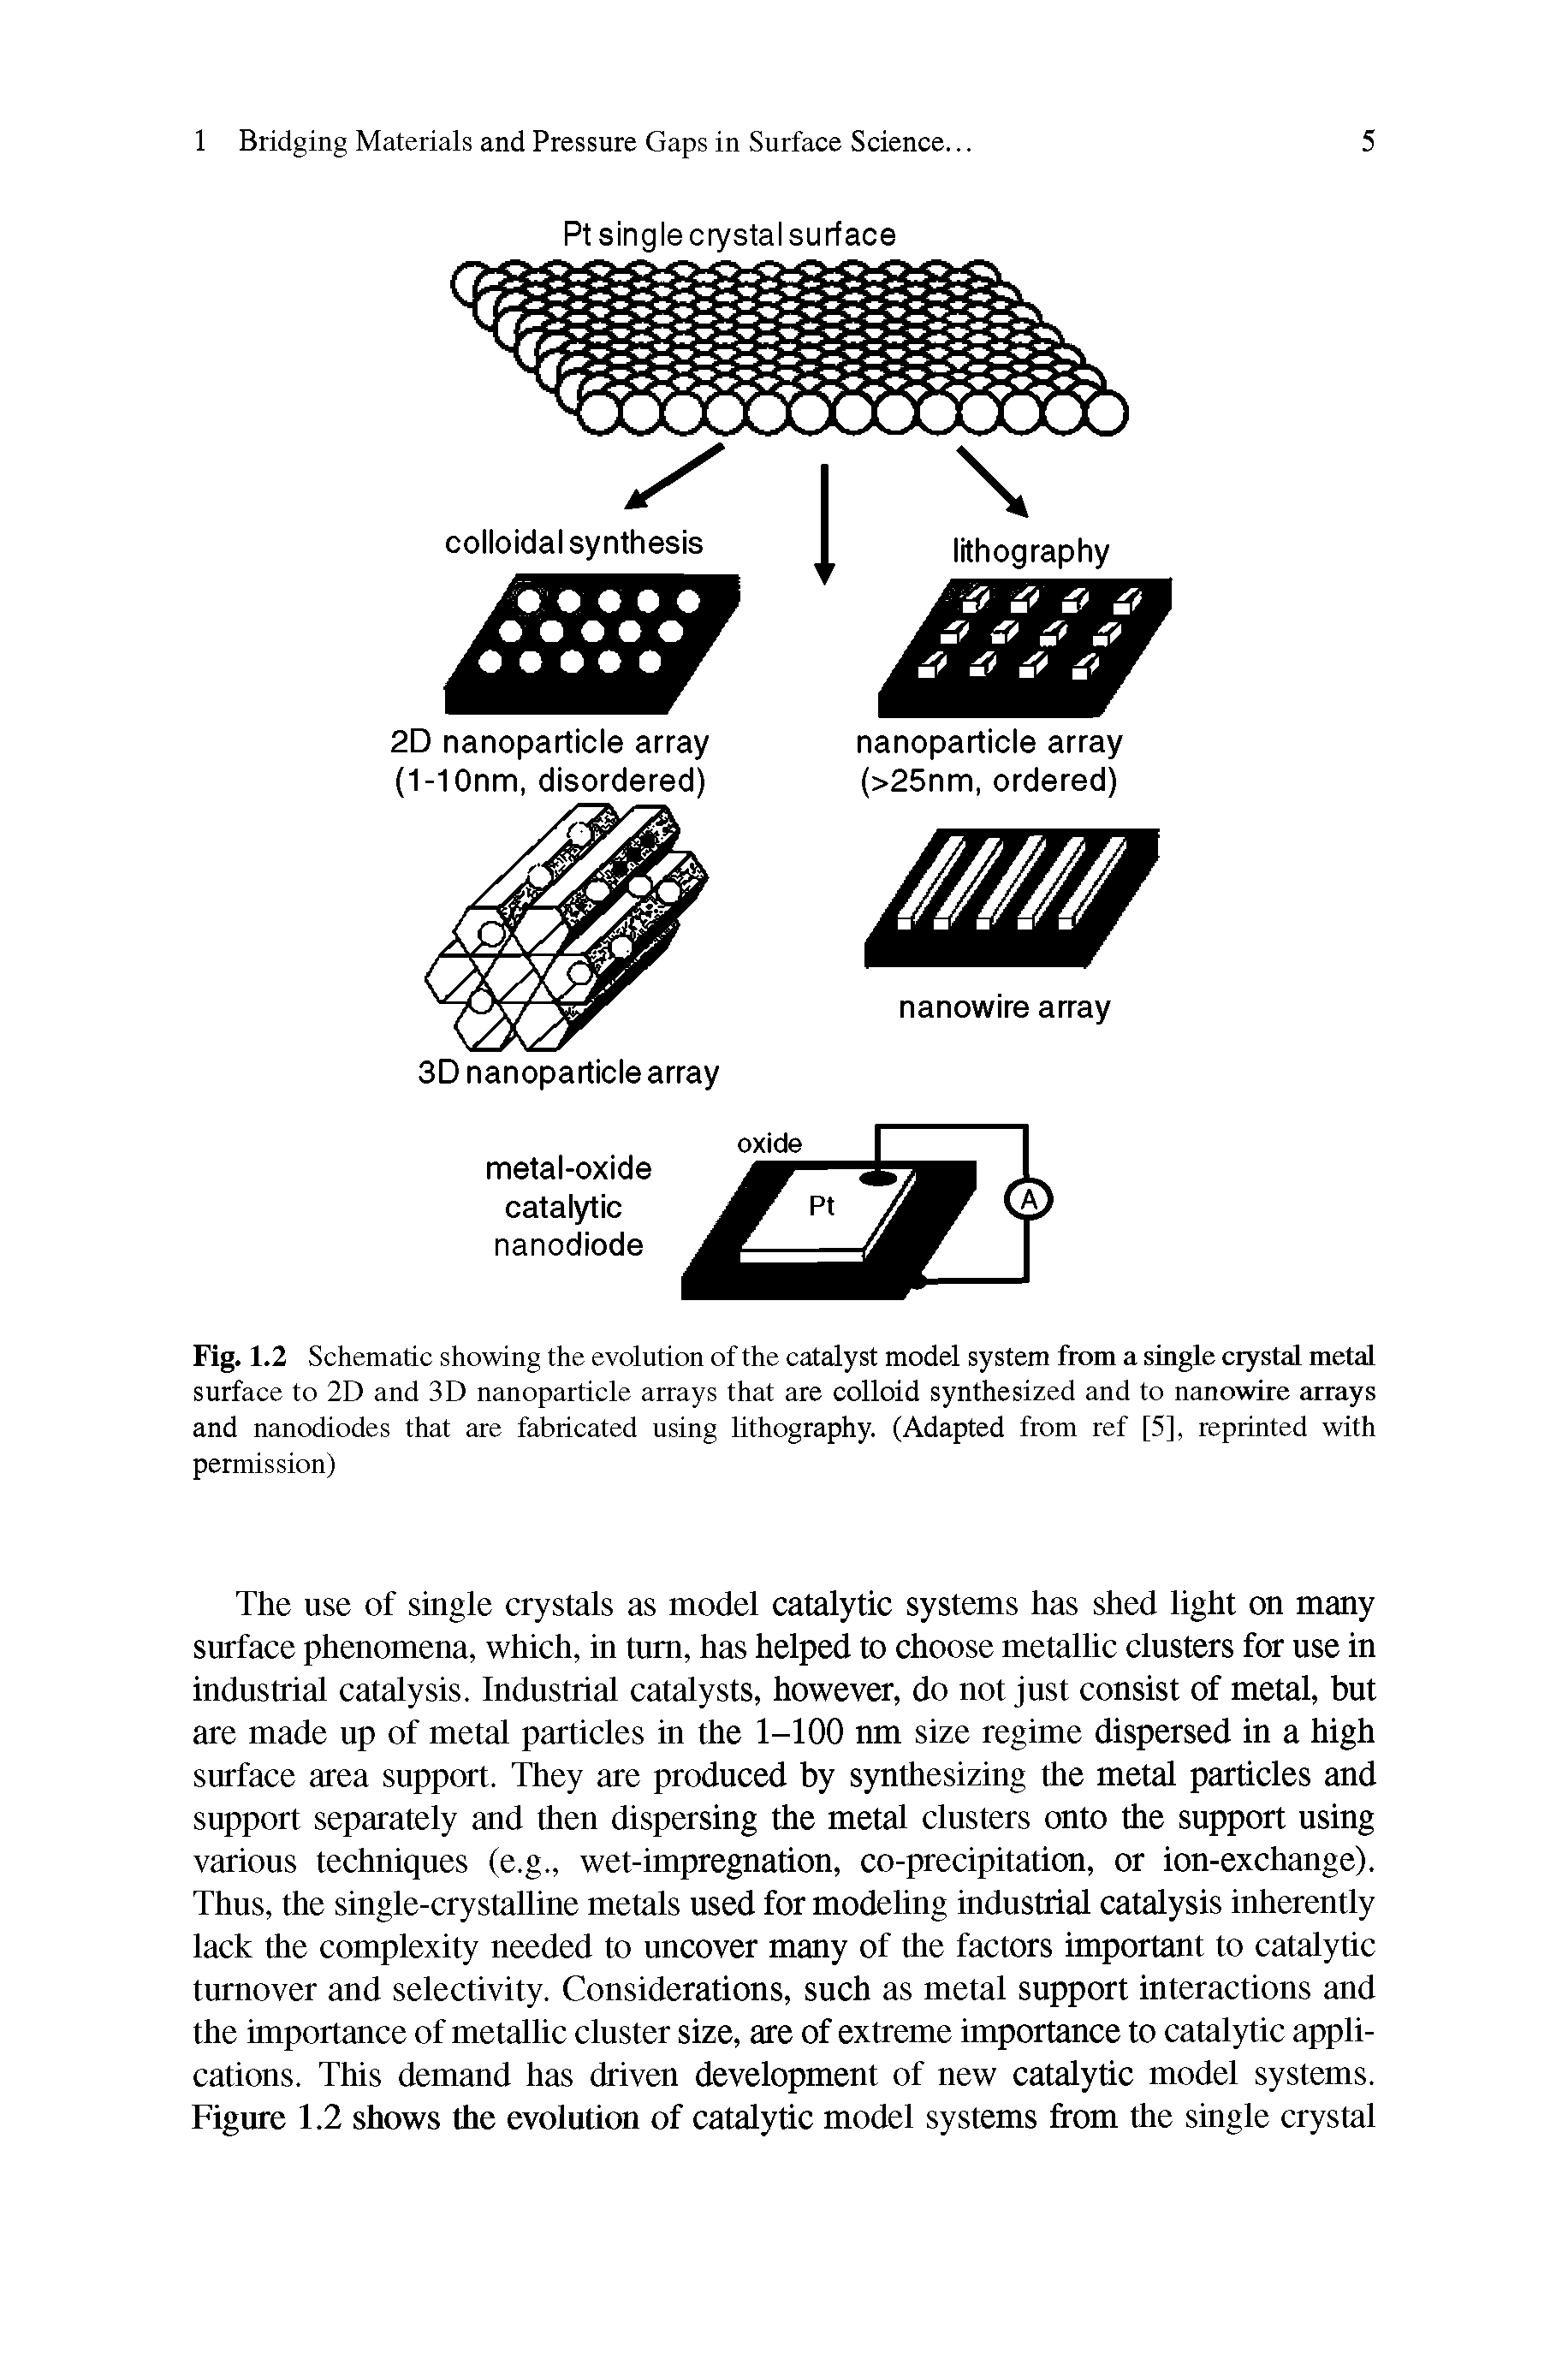 Fig. 1.2 Schematic showing the evolution of the catalyst model system from a single crystal metal surface to 2D and 3D nanoparticle arrays that are colloid synthesized and to nanowire arrays and nanodiodes that are fabricated using lithography. (Adapted from ref [5], reprinted with permission)...